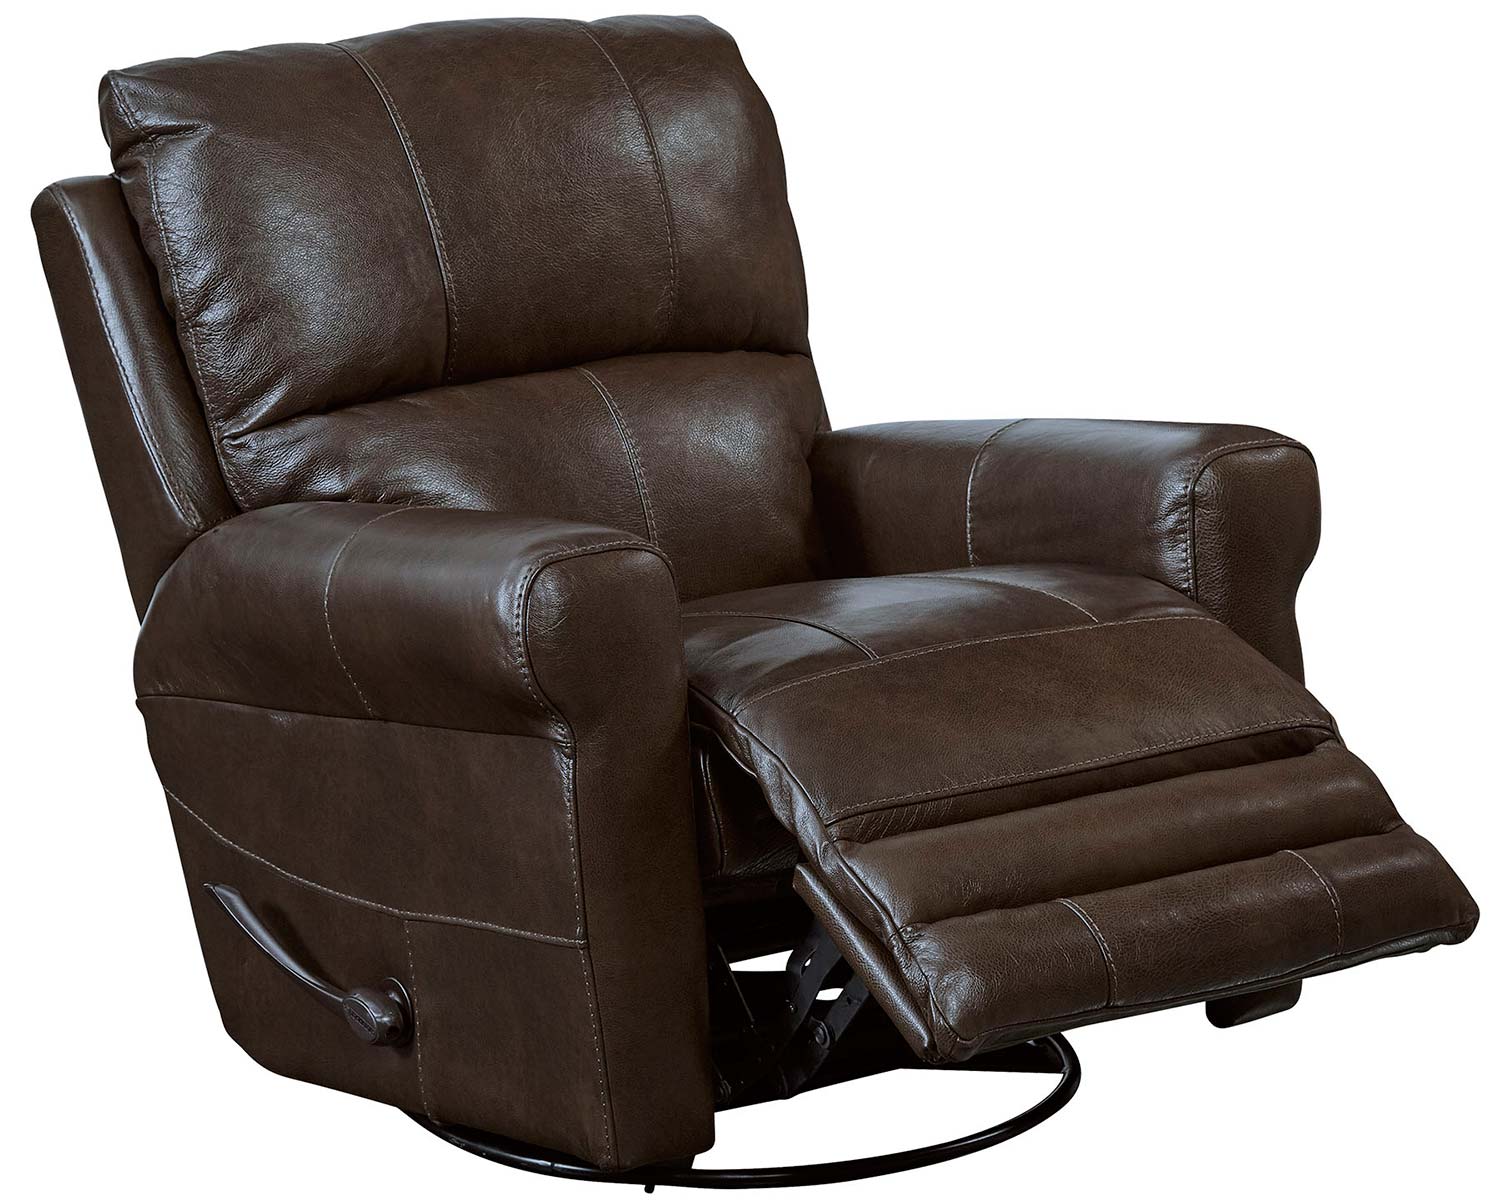 CatNapper Hoffner Leather Recliner Chair - Chocolate